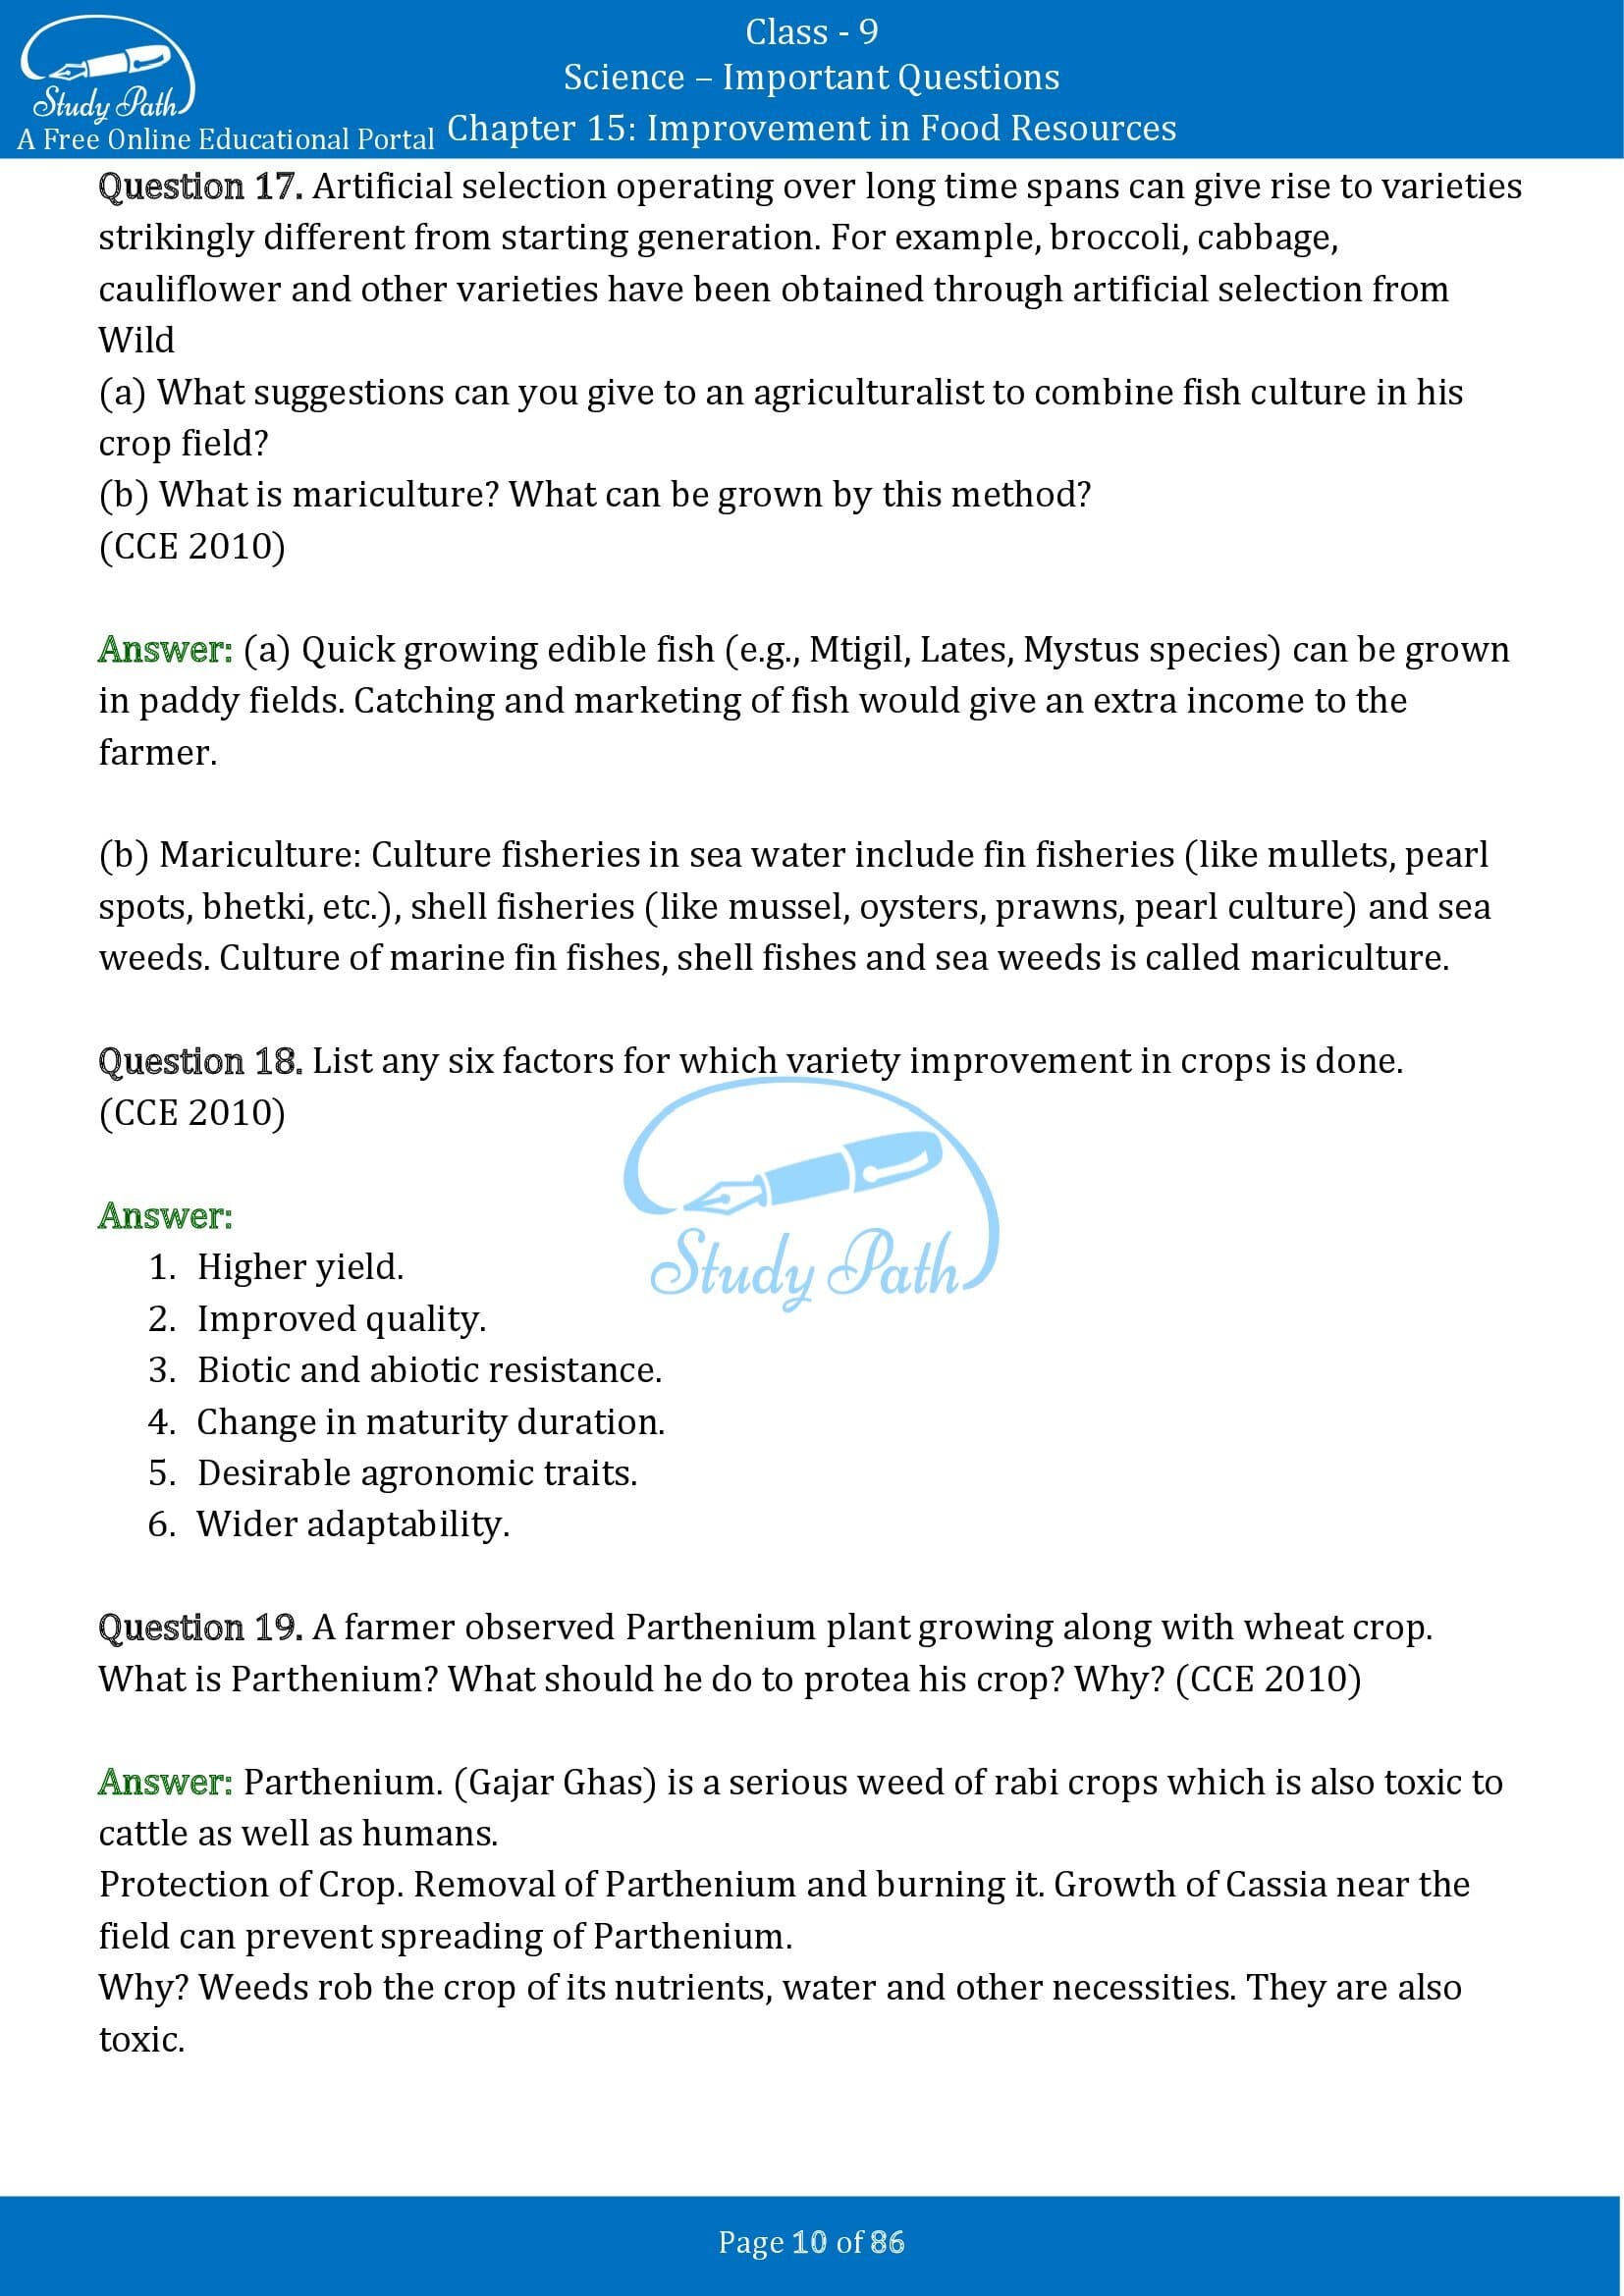 Important Questions for Class 9 Science Chapter 15 Improvement in Food Resources 00010